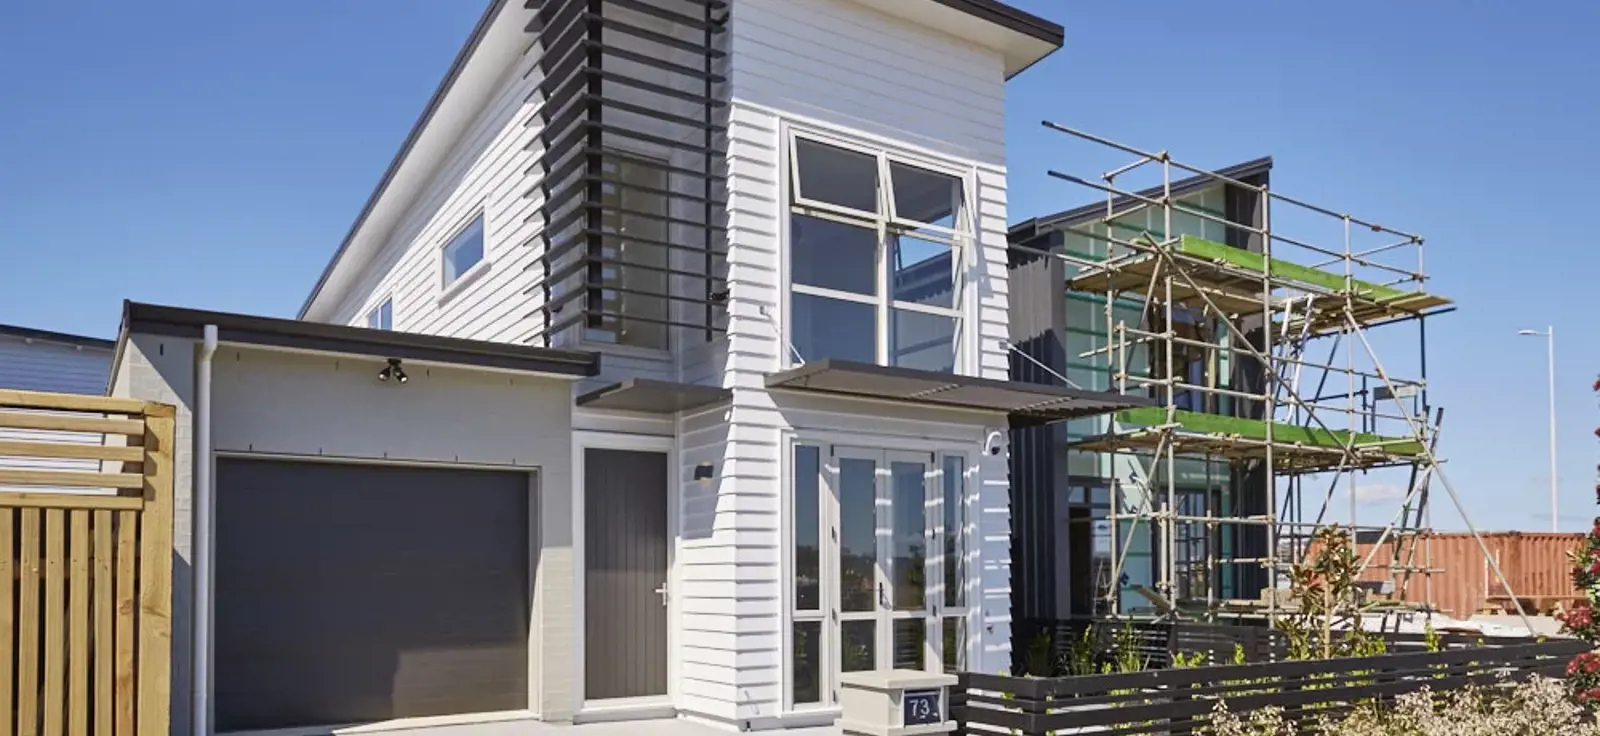 First Home Completed At The Airfields, Hobsonville Point